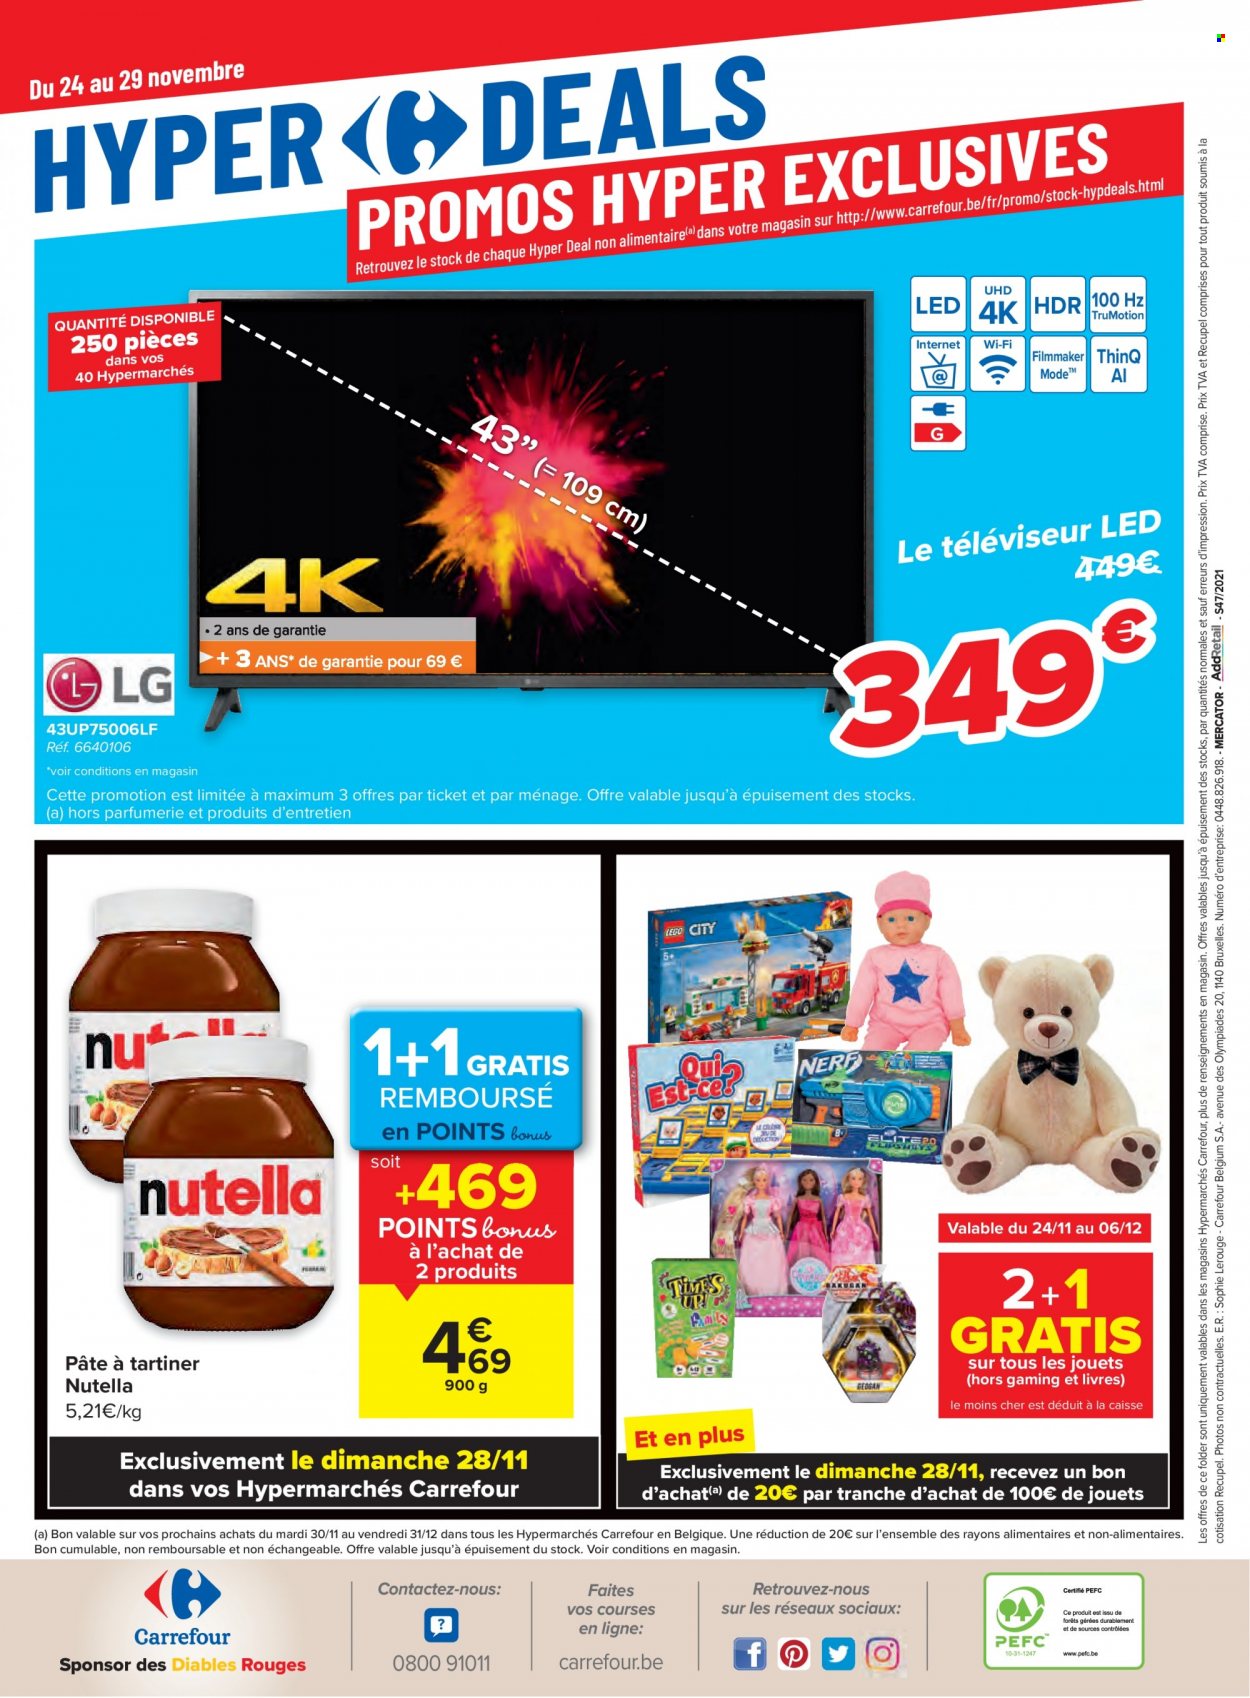 Catalogue Carrefour hypermarkt - 24.11.2021 - 6.12.2021. Page 32.